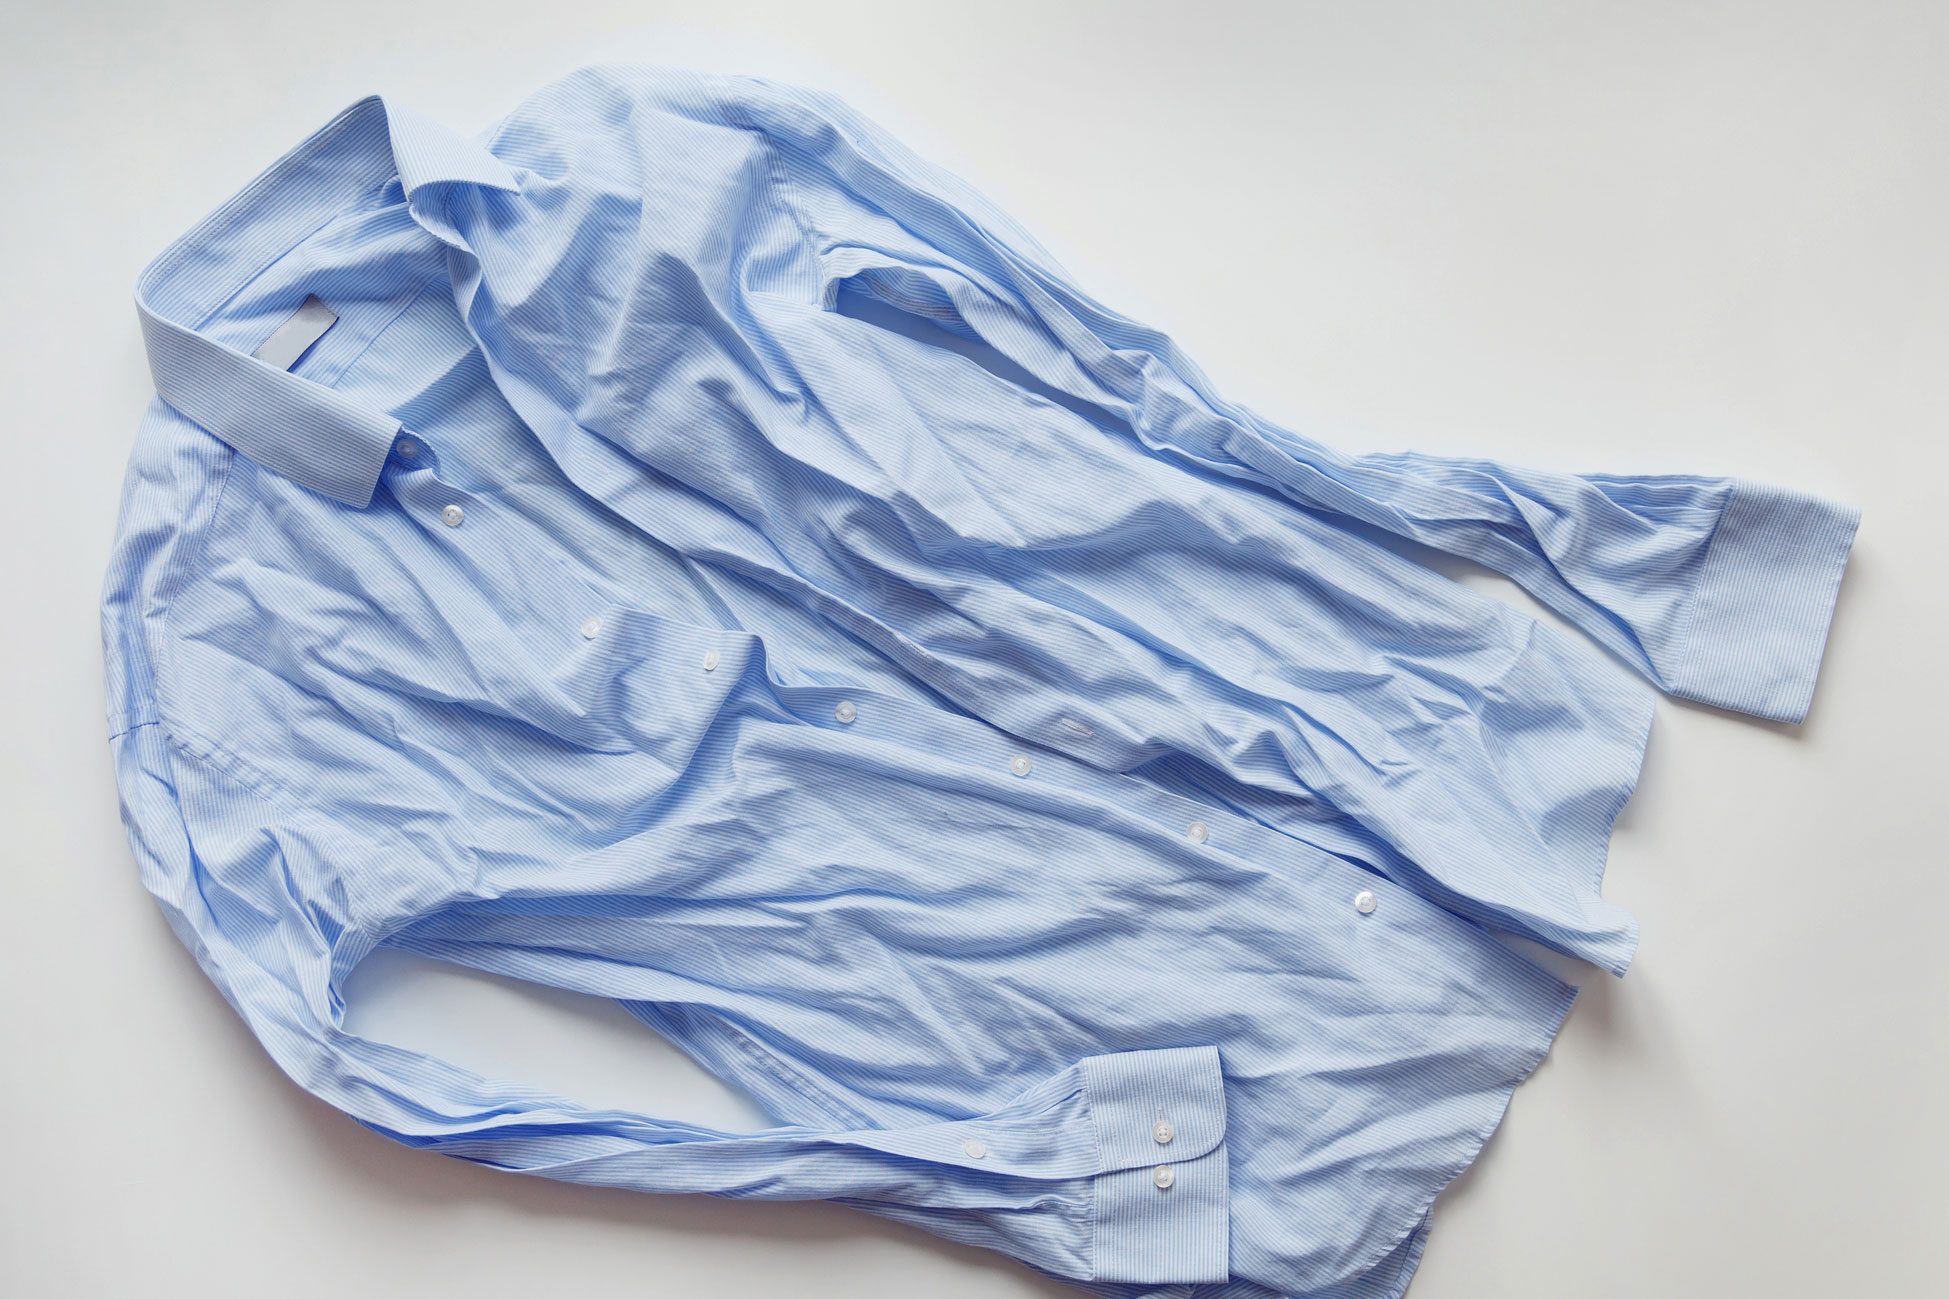 10 Surprising Ways Get Wrinkles Out of Clothes Without an Iron